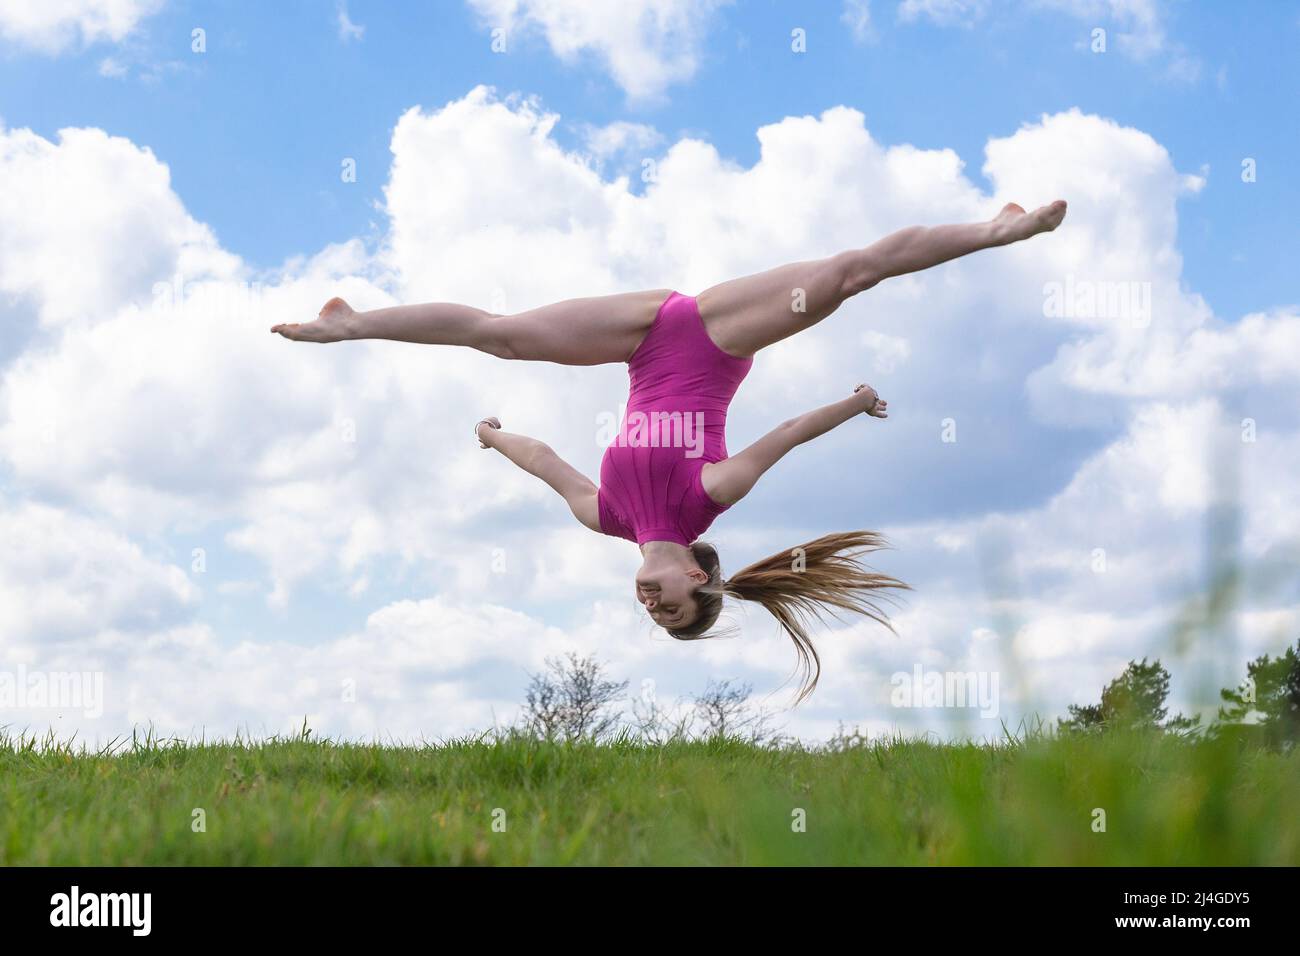 Birmingham, UK. 15th Apr, 2022. 17-year-old dance student Amelia Hubbard of Halesowen, West Midlands, takes to the park in south Birmingham to do some spring moves, as temperatures soar in the UK on Good Friday. Credit: Peter Lopeman/Alamy Live News Stock Photo